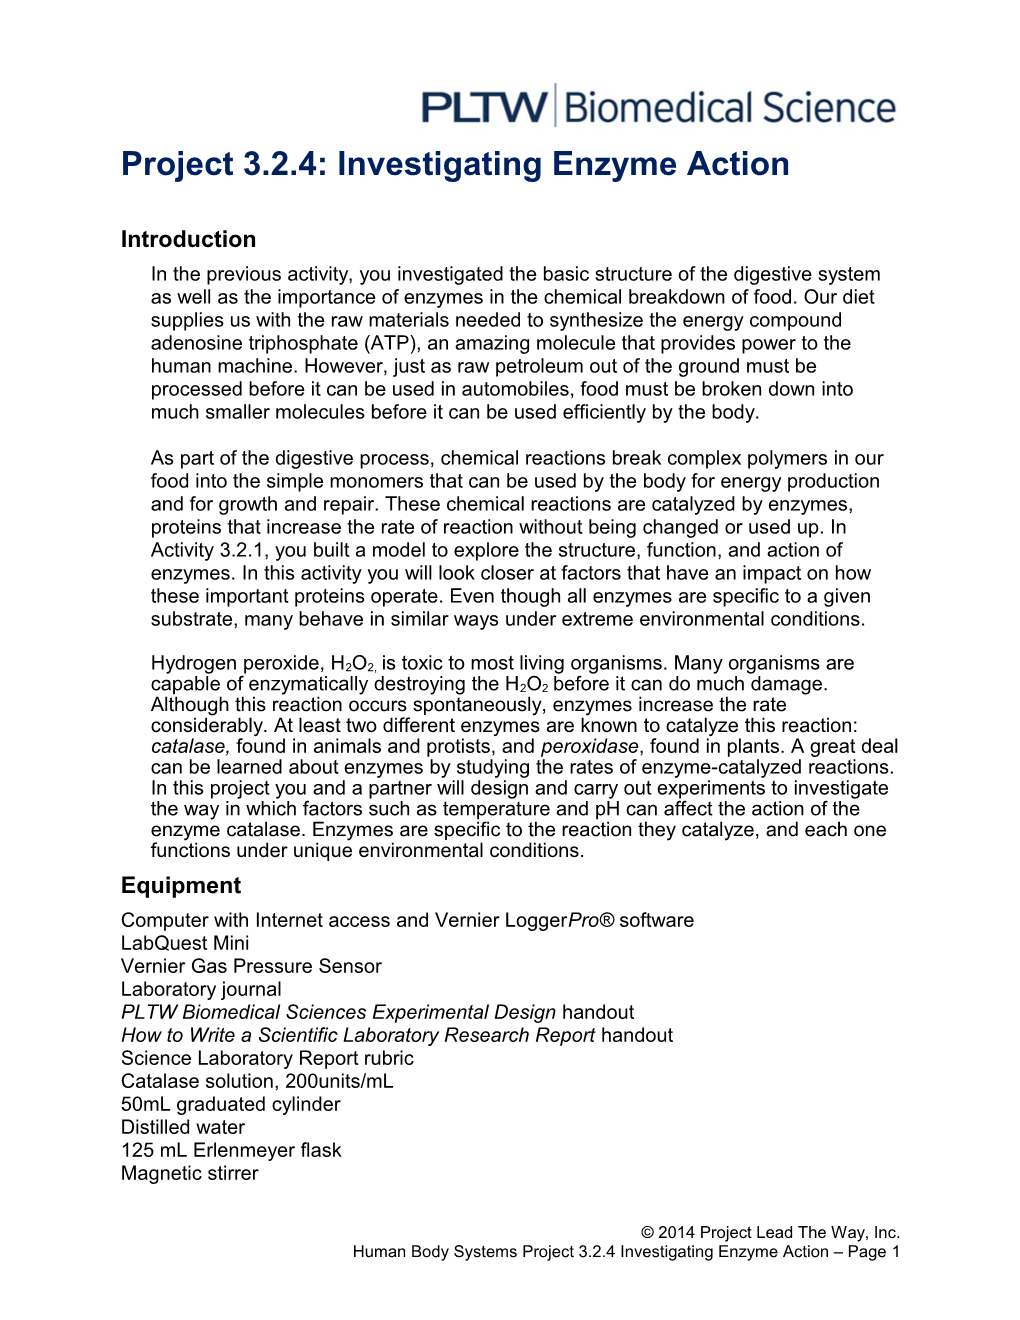 Project 3.2.4: Investigating Enzyme Action s1